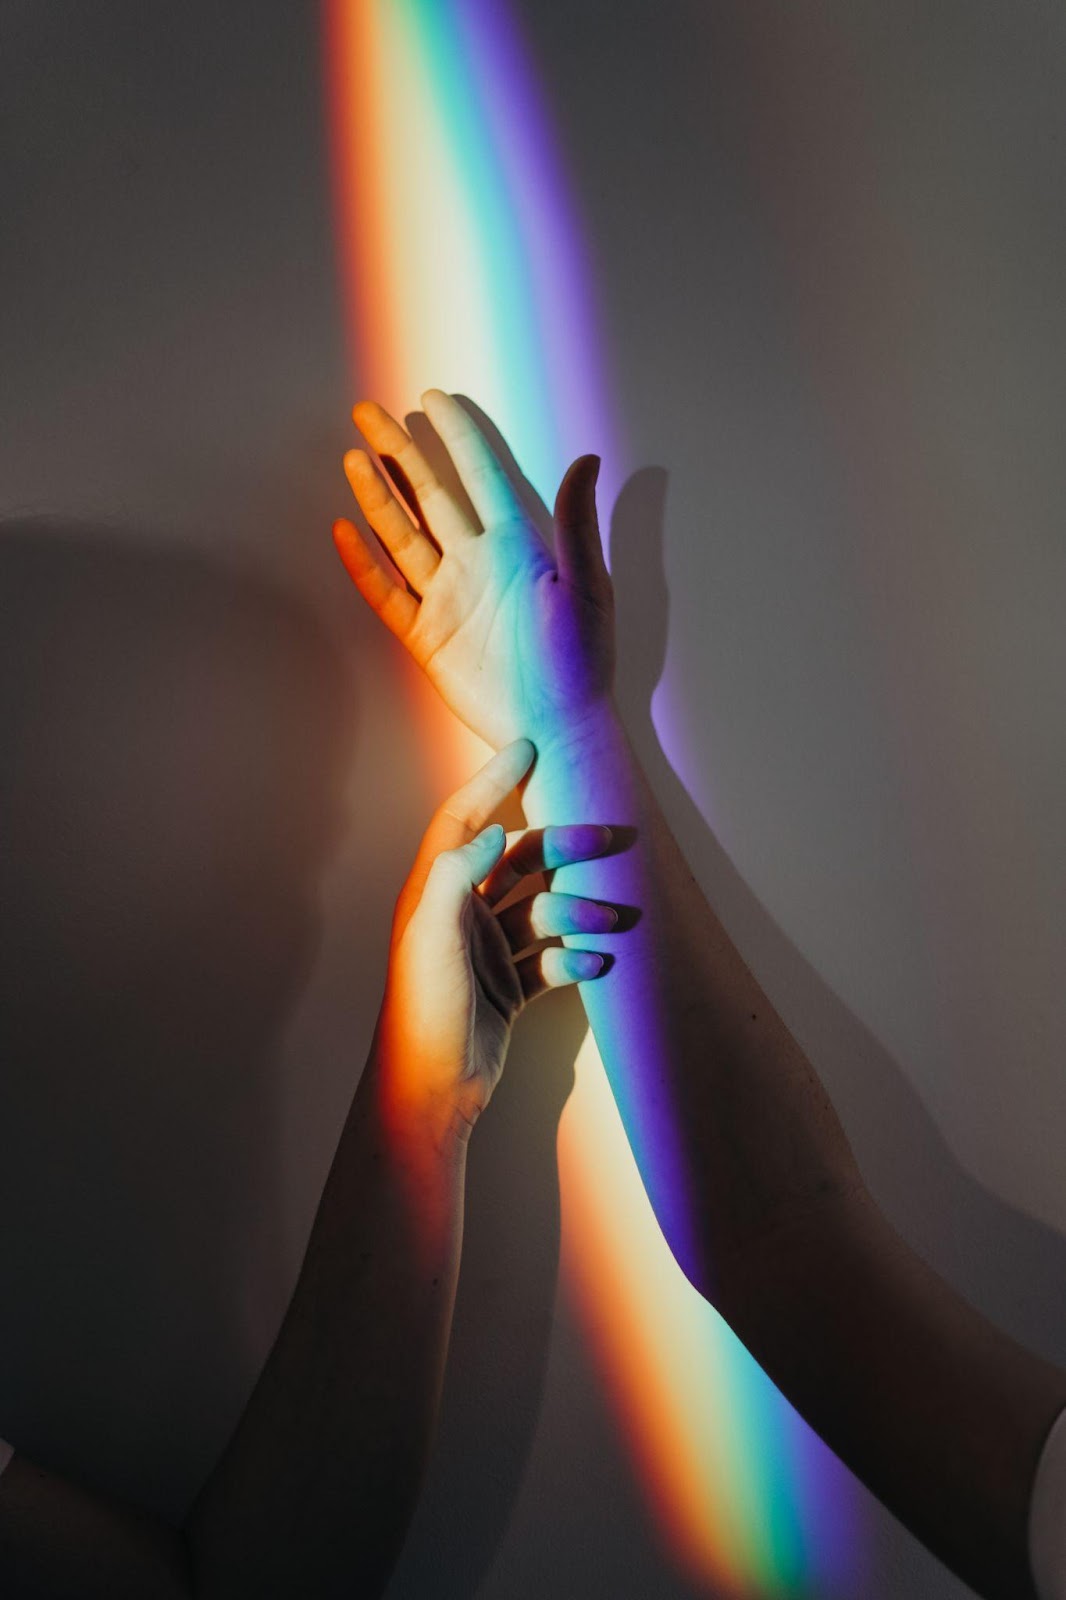 Hands with a rainbow over them